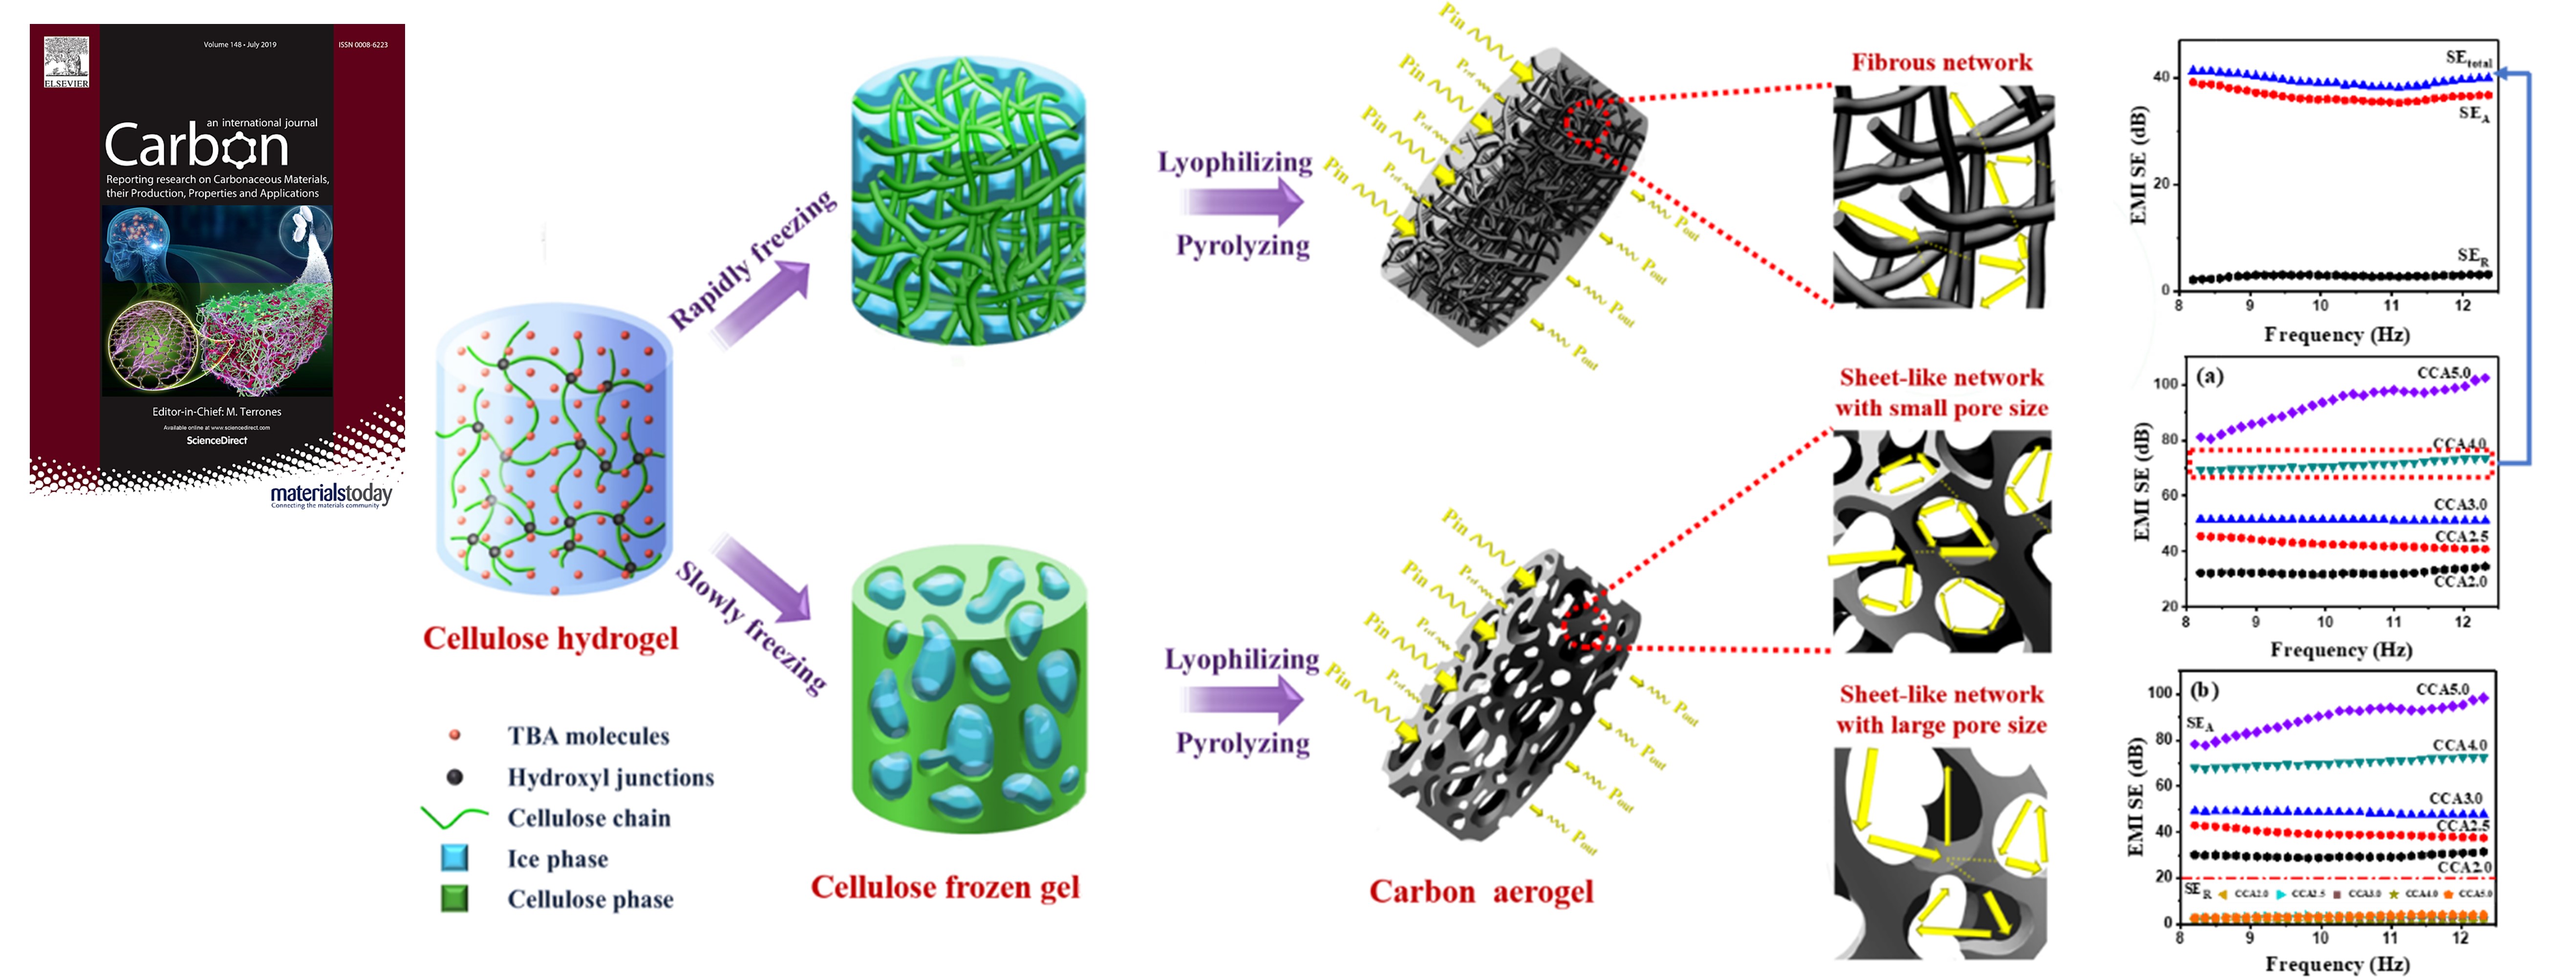 Structuring dense three-dimensional sheet-like skeleton networks in biomass-derived carbon aerogels for efficient electromagnetic interference shielding.